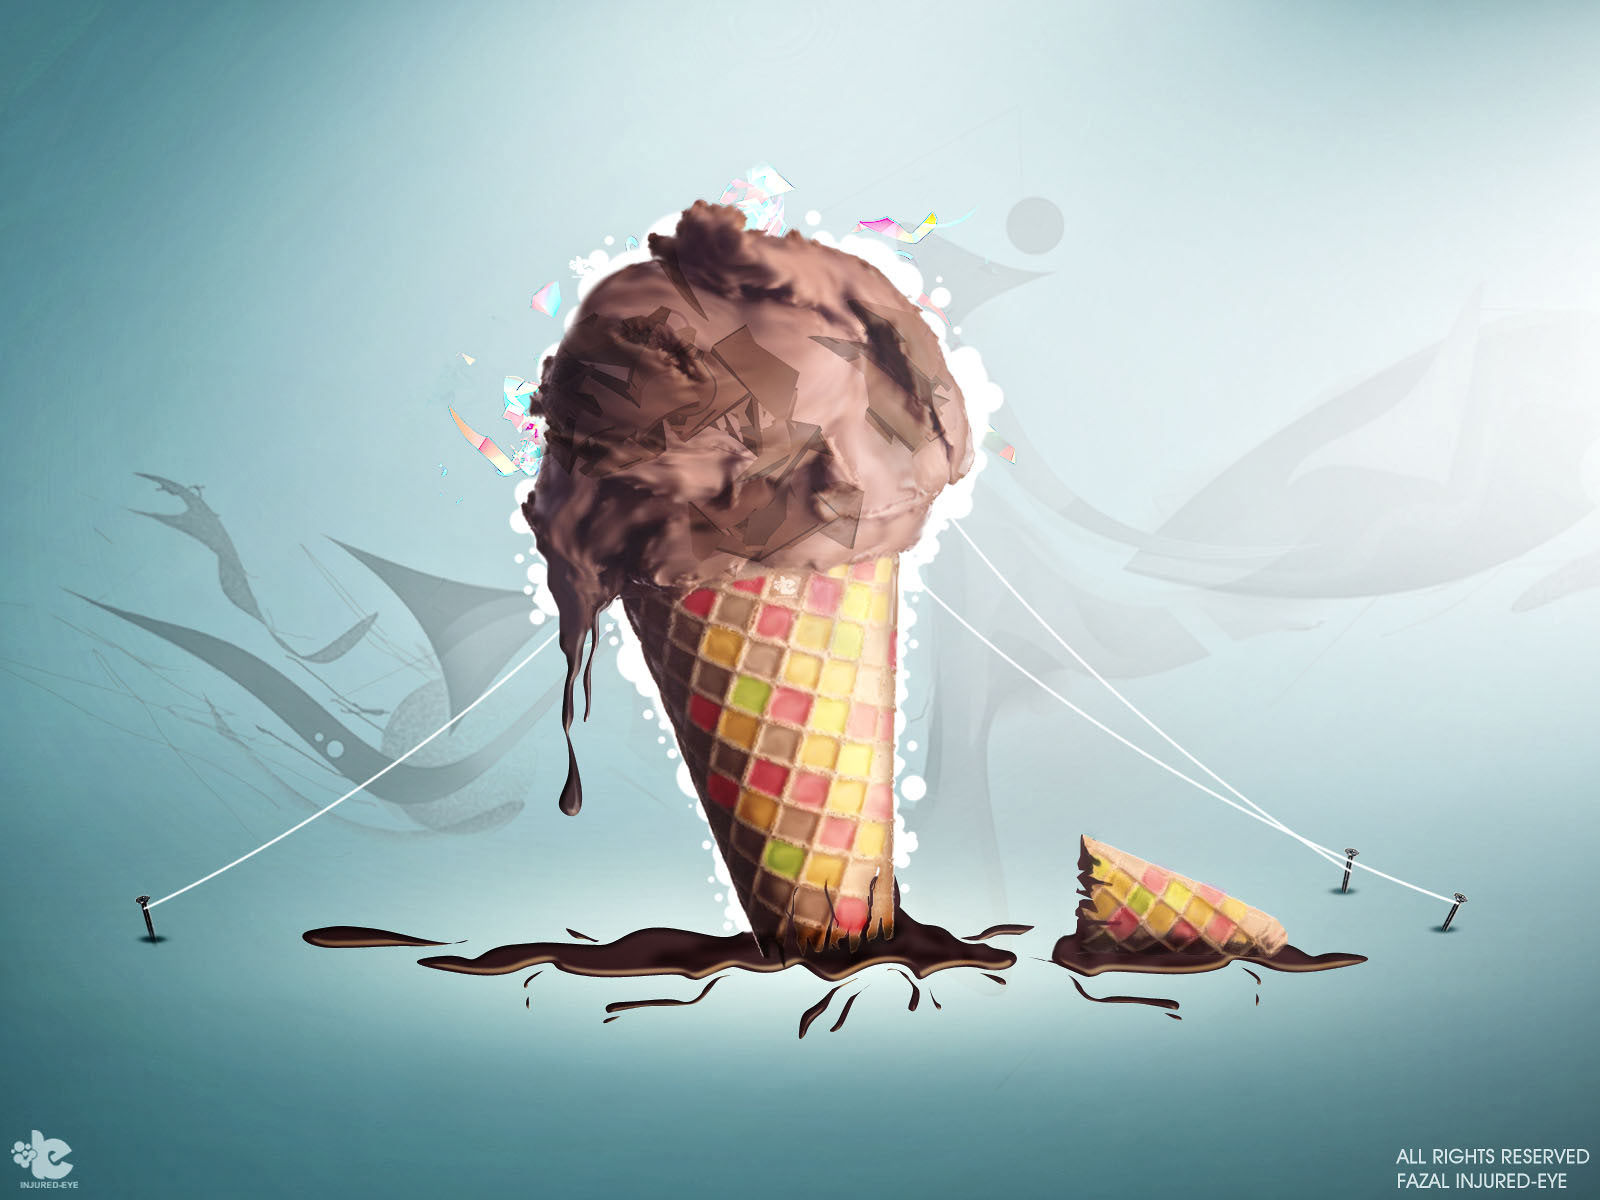 A delectable ice cream treat served in a cone, a sweet indulgence for any food lover.